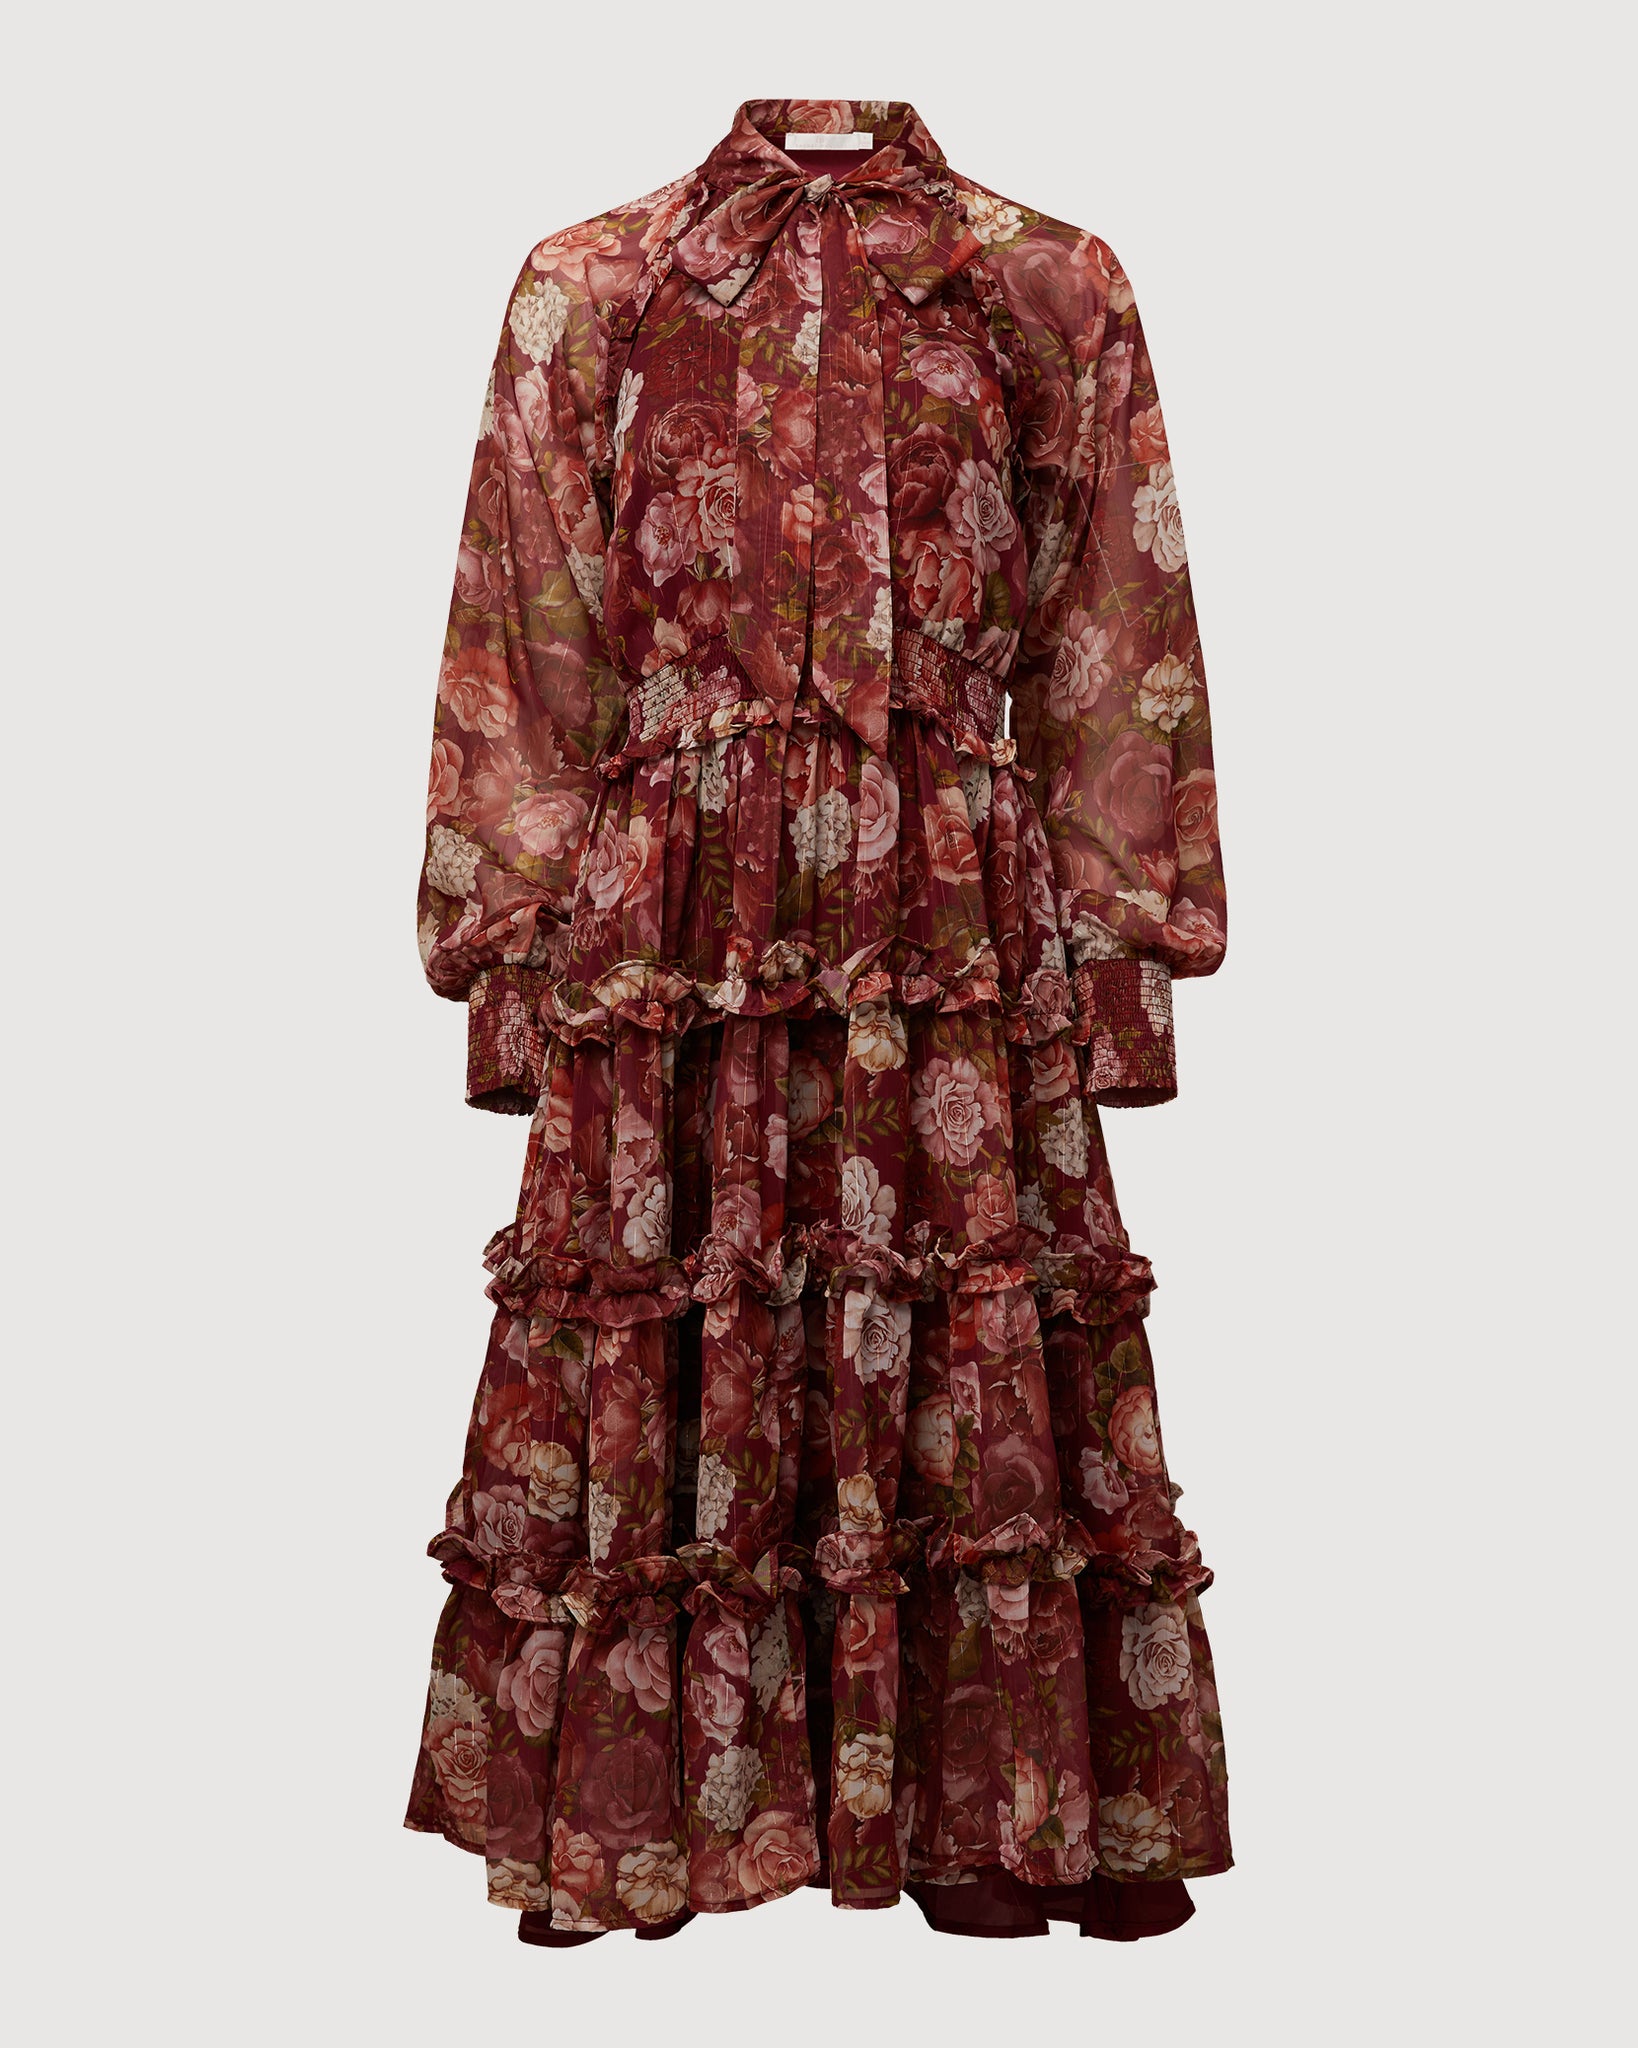 Photo of Smocked Ruffle Midi Dress in a red wine floral print from Rachel Parcell available at UniKoncept in Waterloo